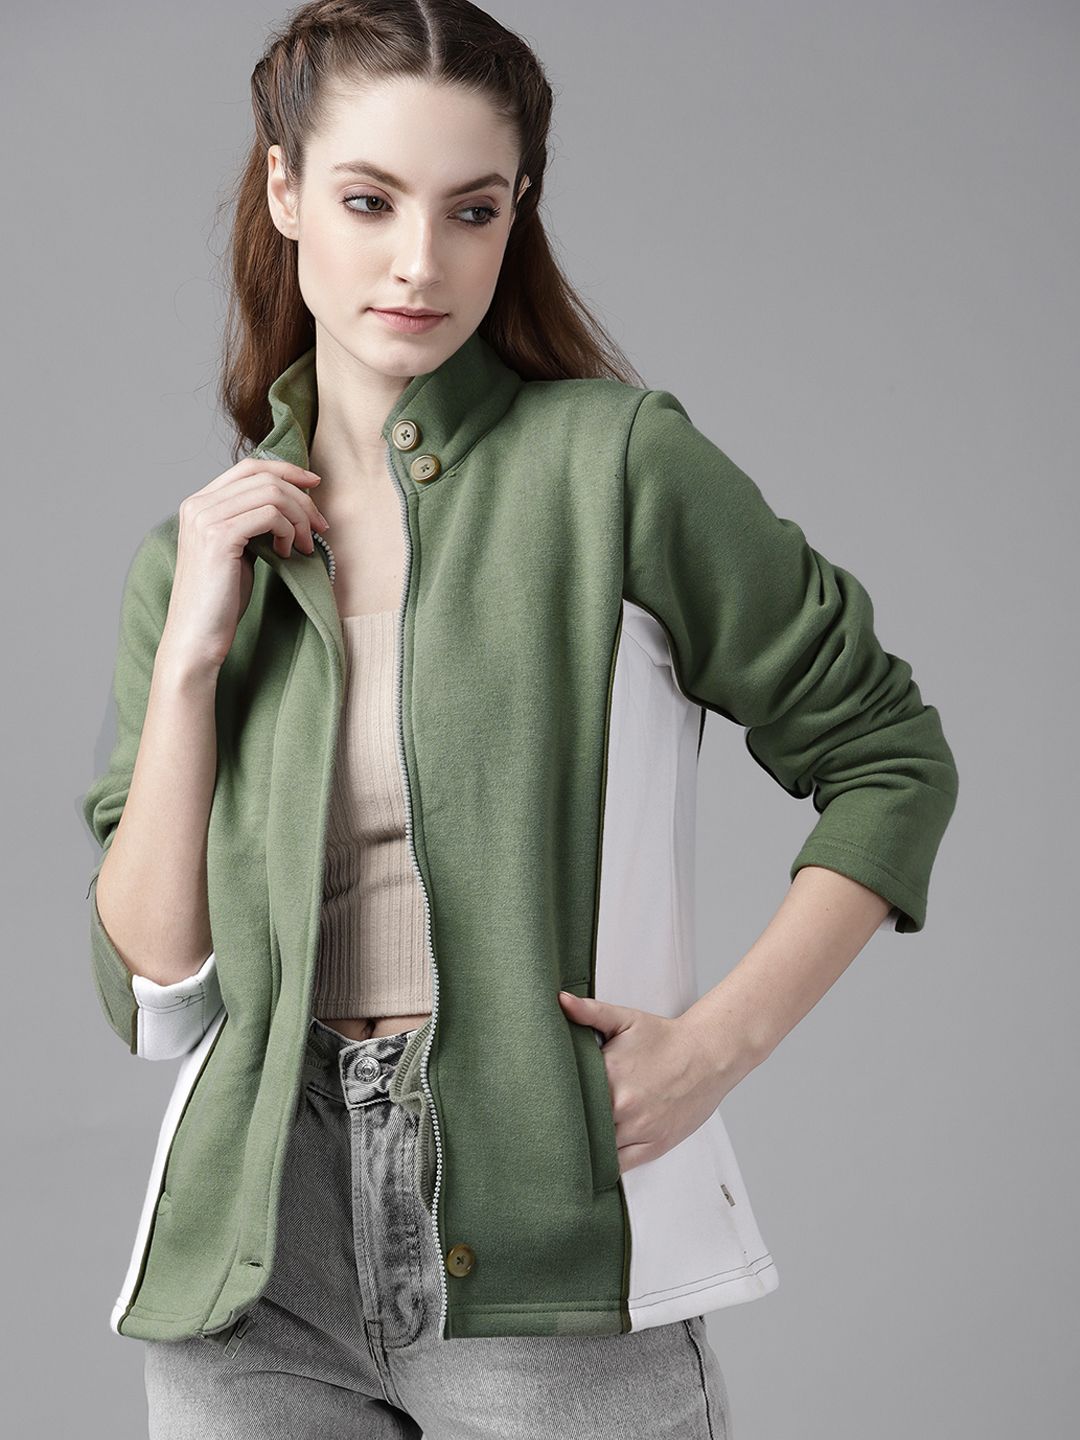 Roadster Women Olive Green White Colourblocked Tailored Jacket Price in India